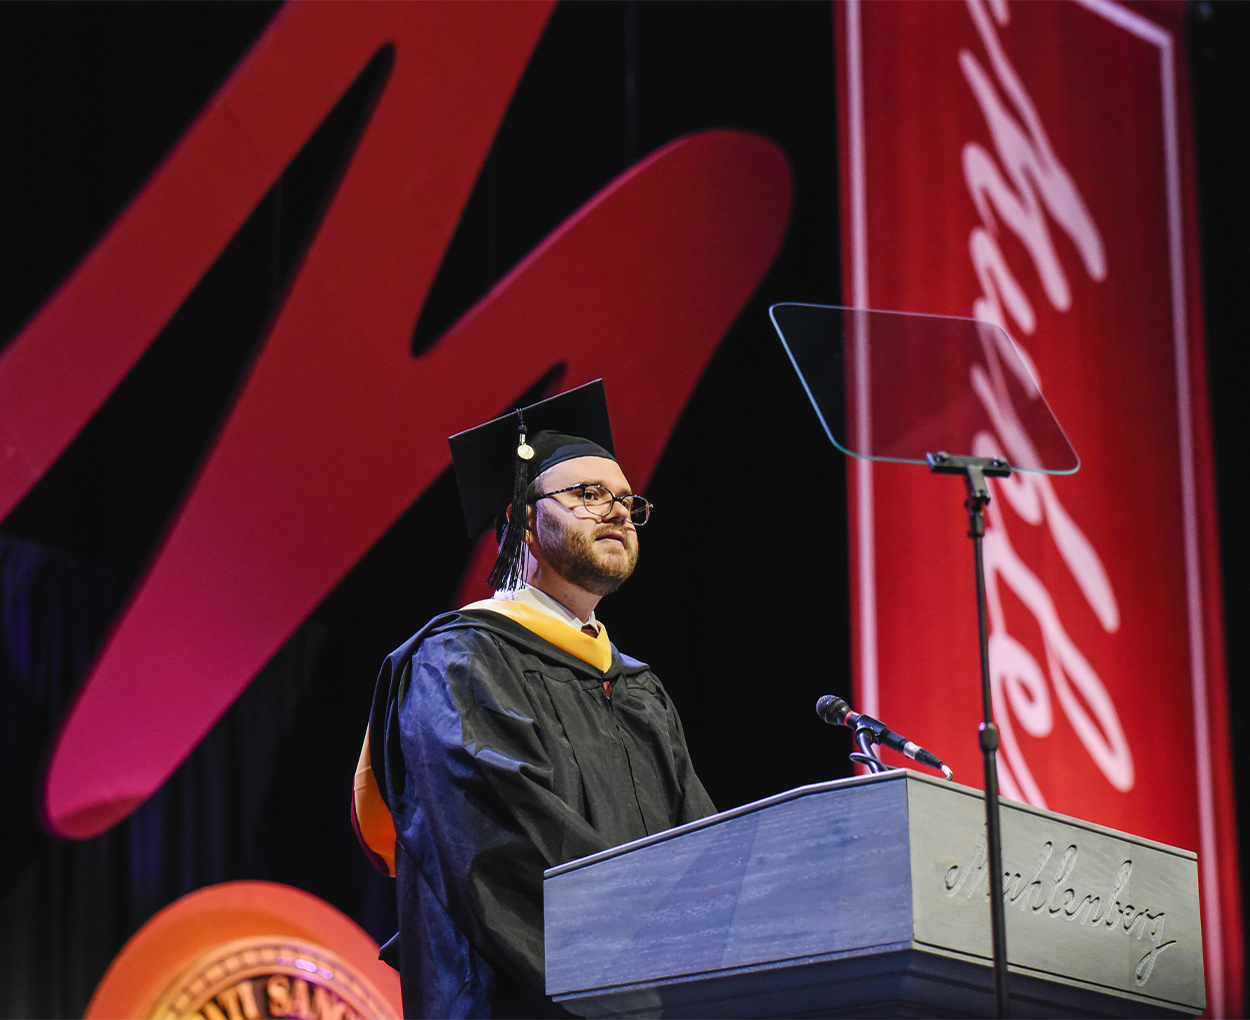 A male student in commencement regalia speaks at a podium.